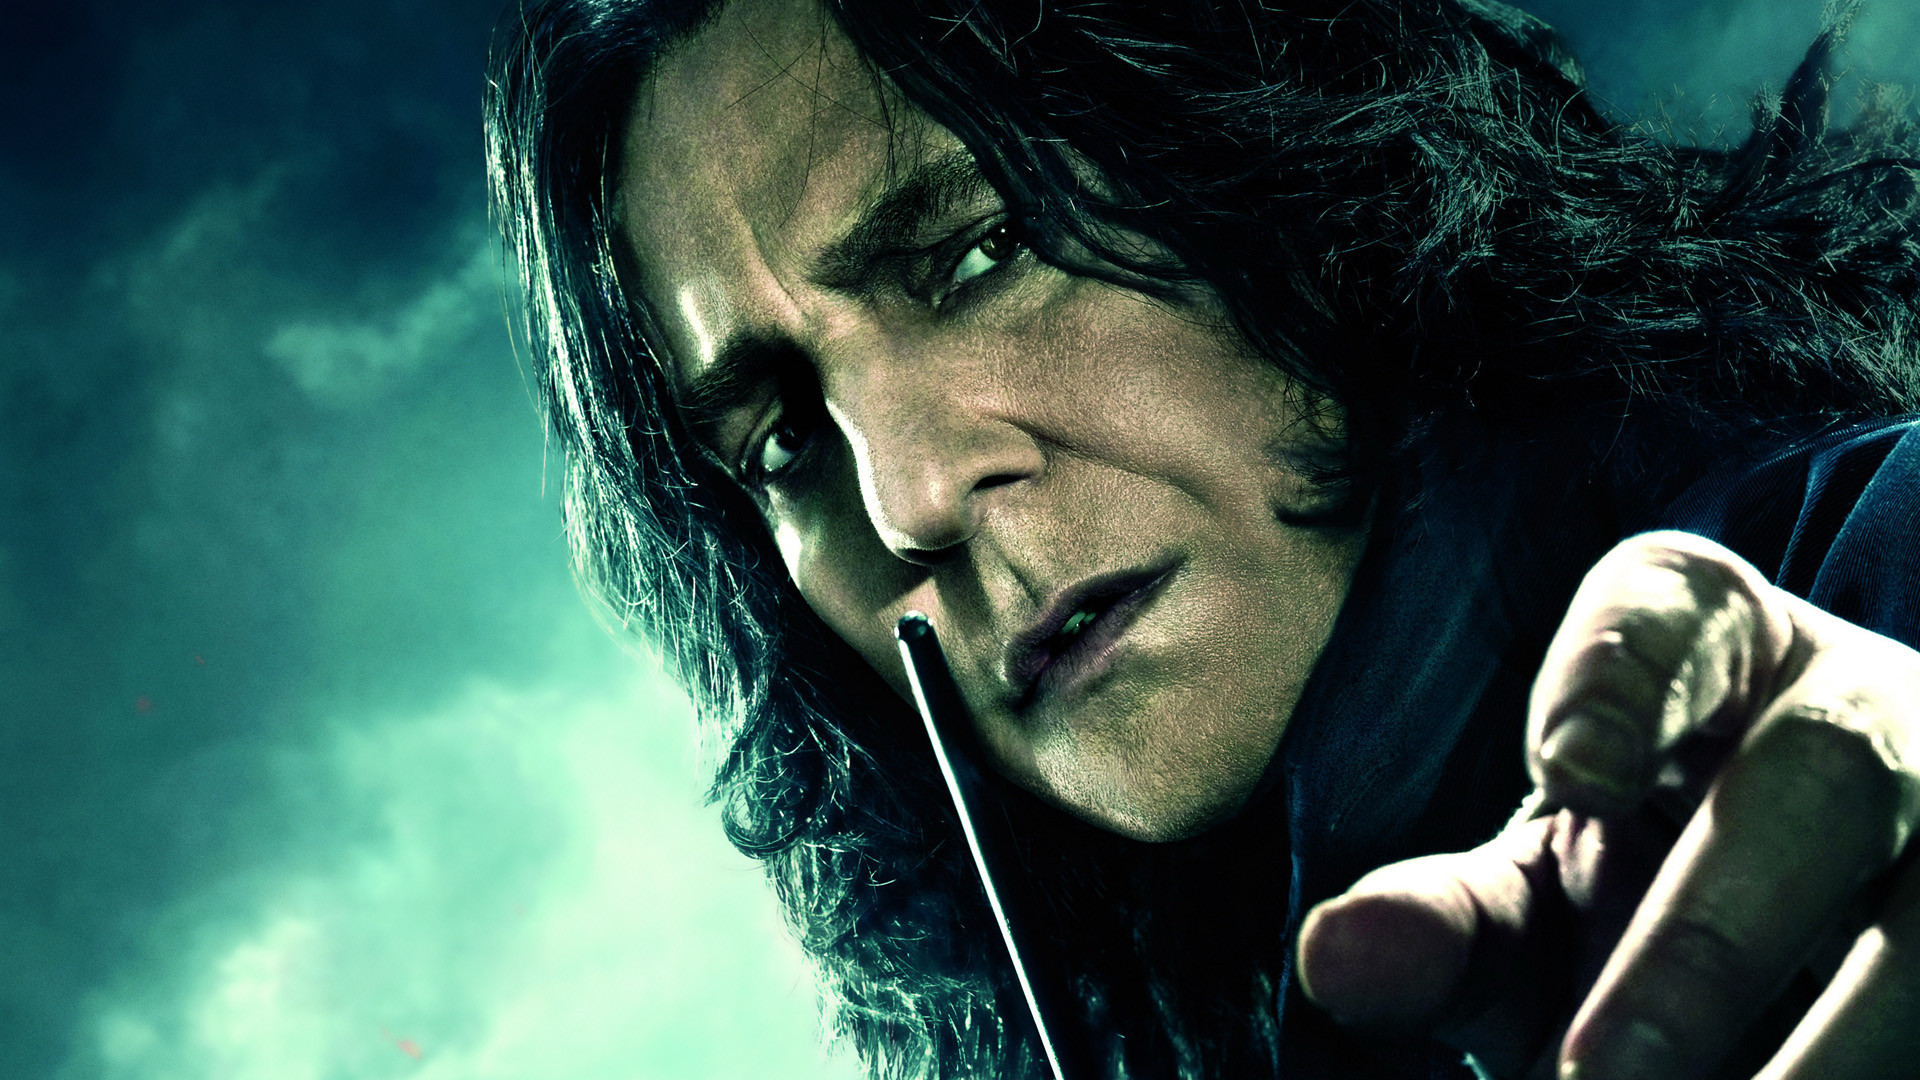 alan rickman, severus snape, harry potter, movie, harry potter and the deathly hallows: part 1